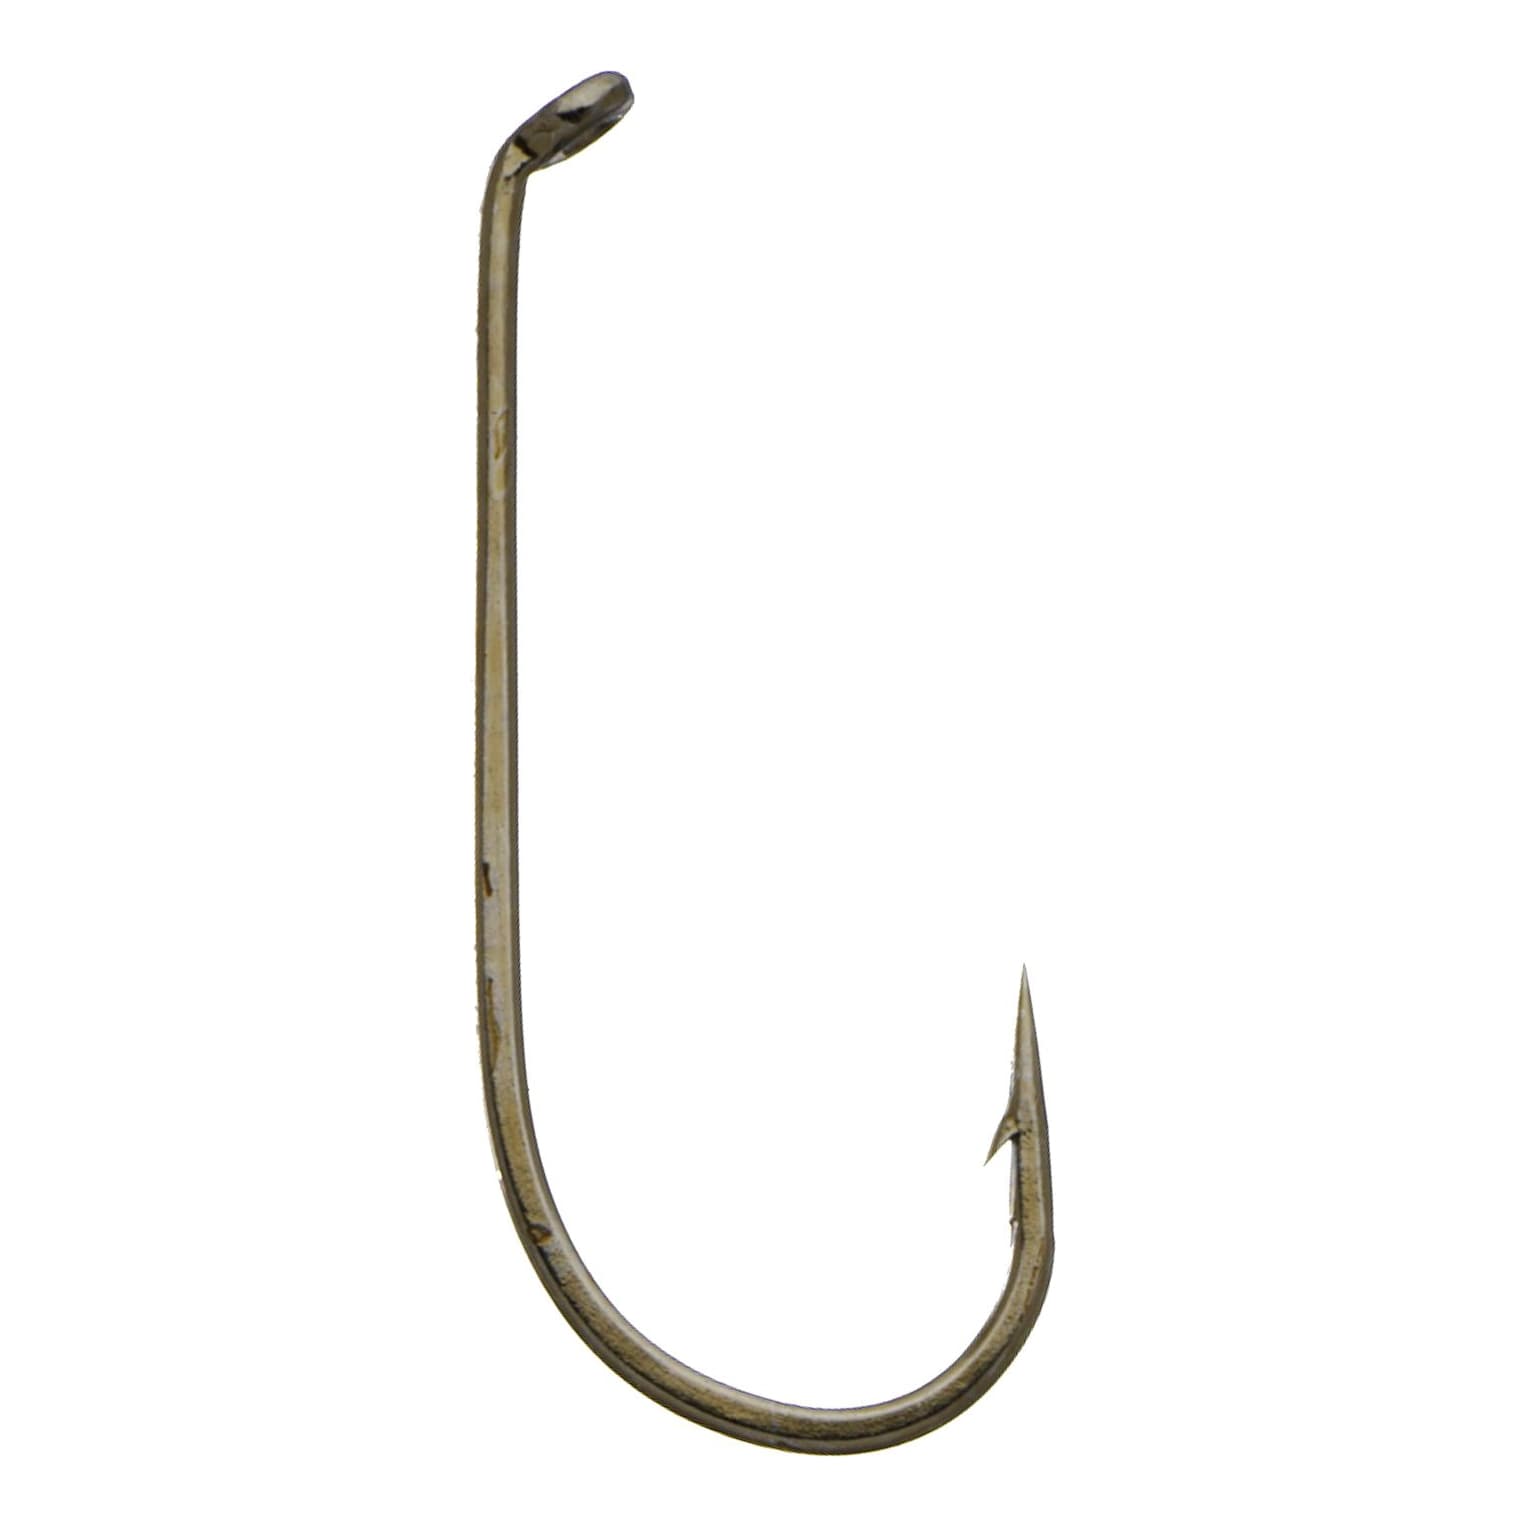 White River Fly Shop® Dry Fly Hook